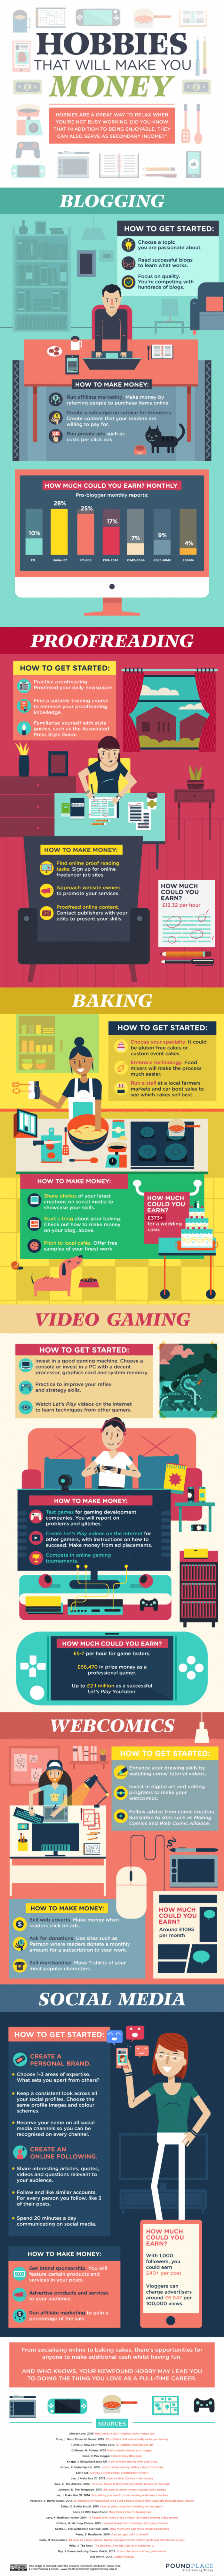 Hobbies That Will Make You Money Infographic